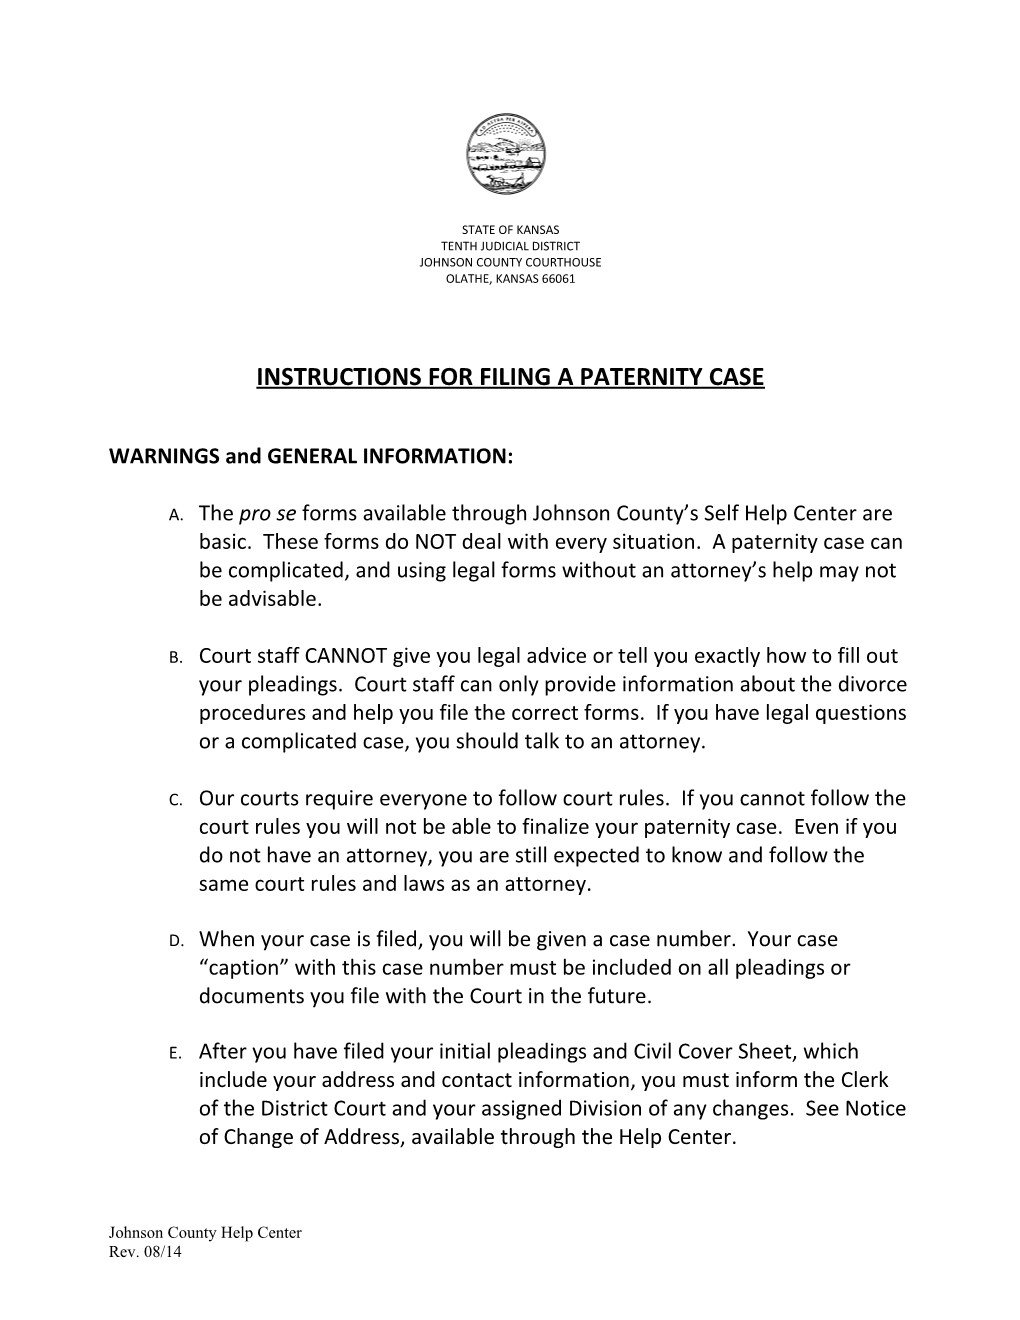 Instructions for Filing a Paternity Case